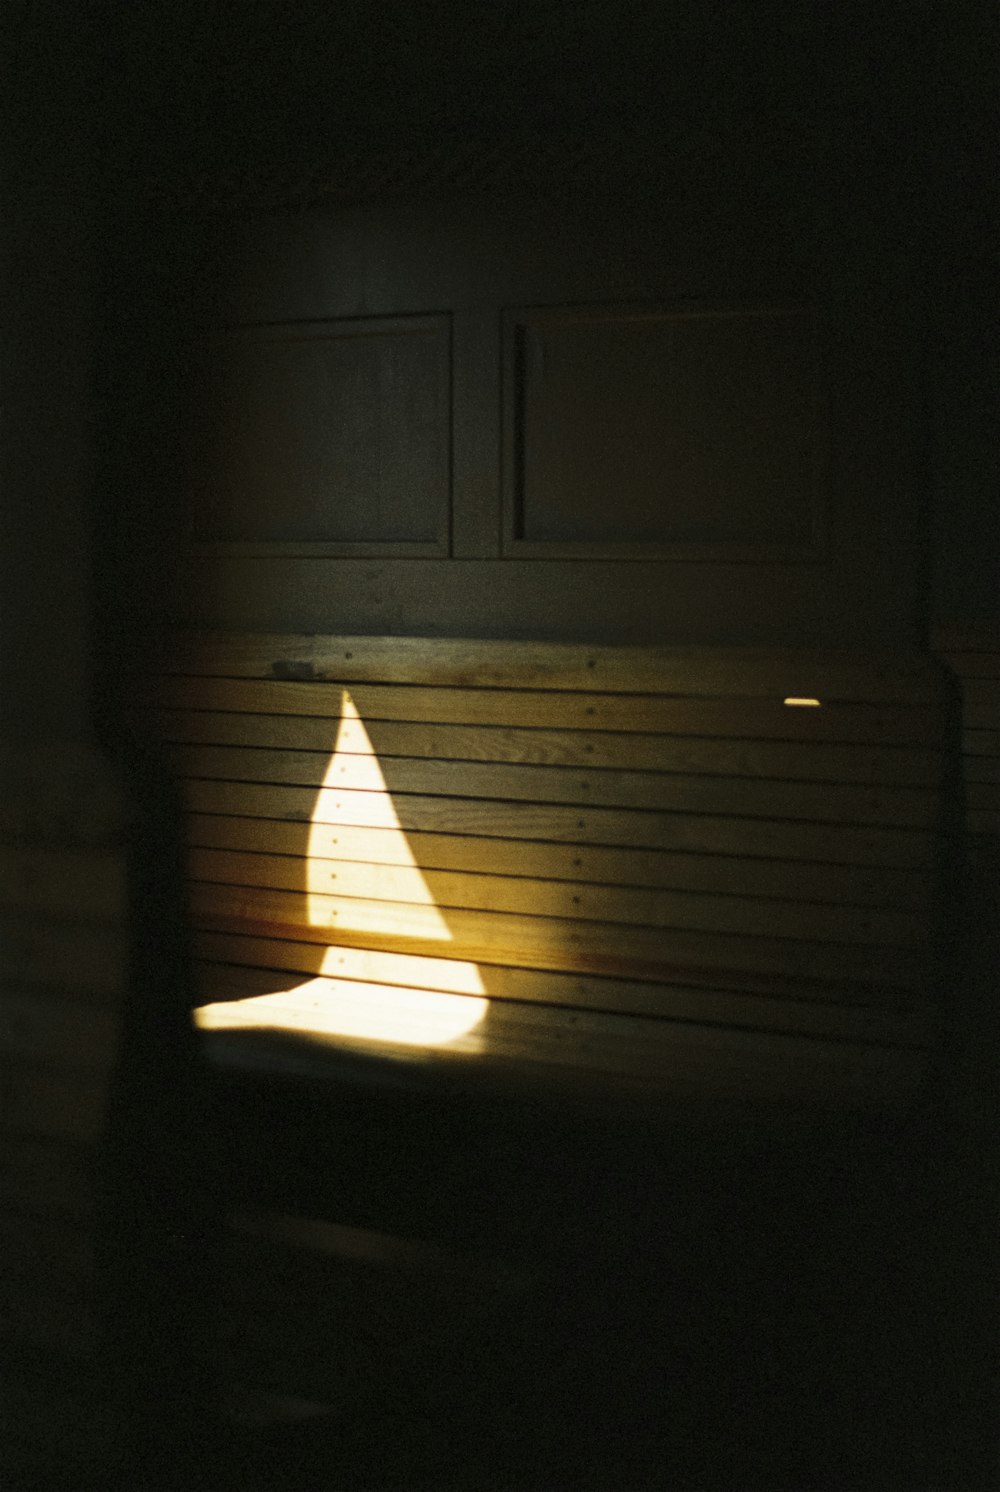 a light shines on a bench in a dark room